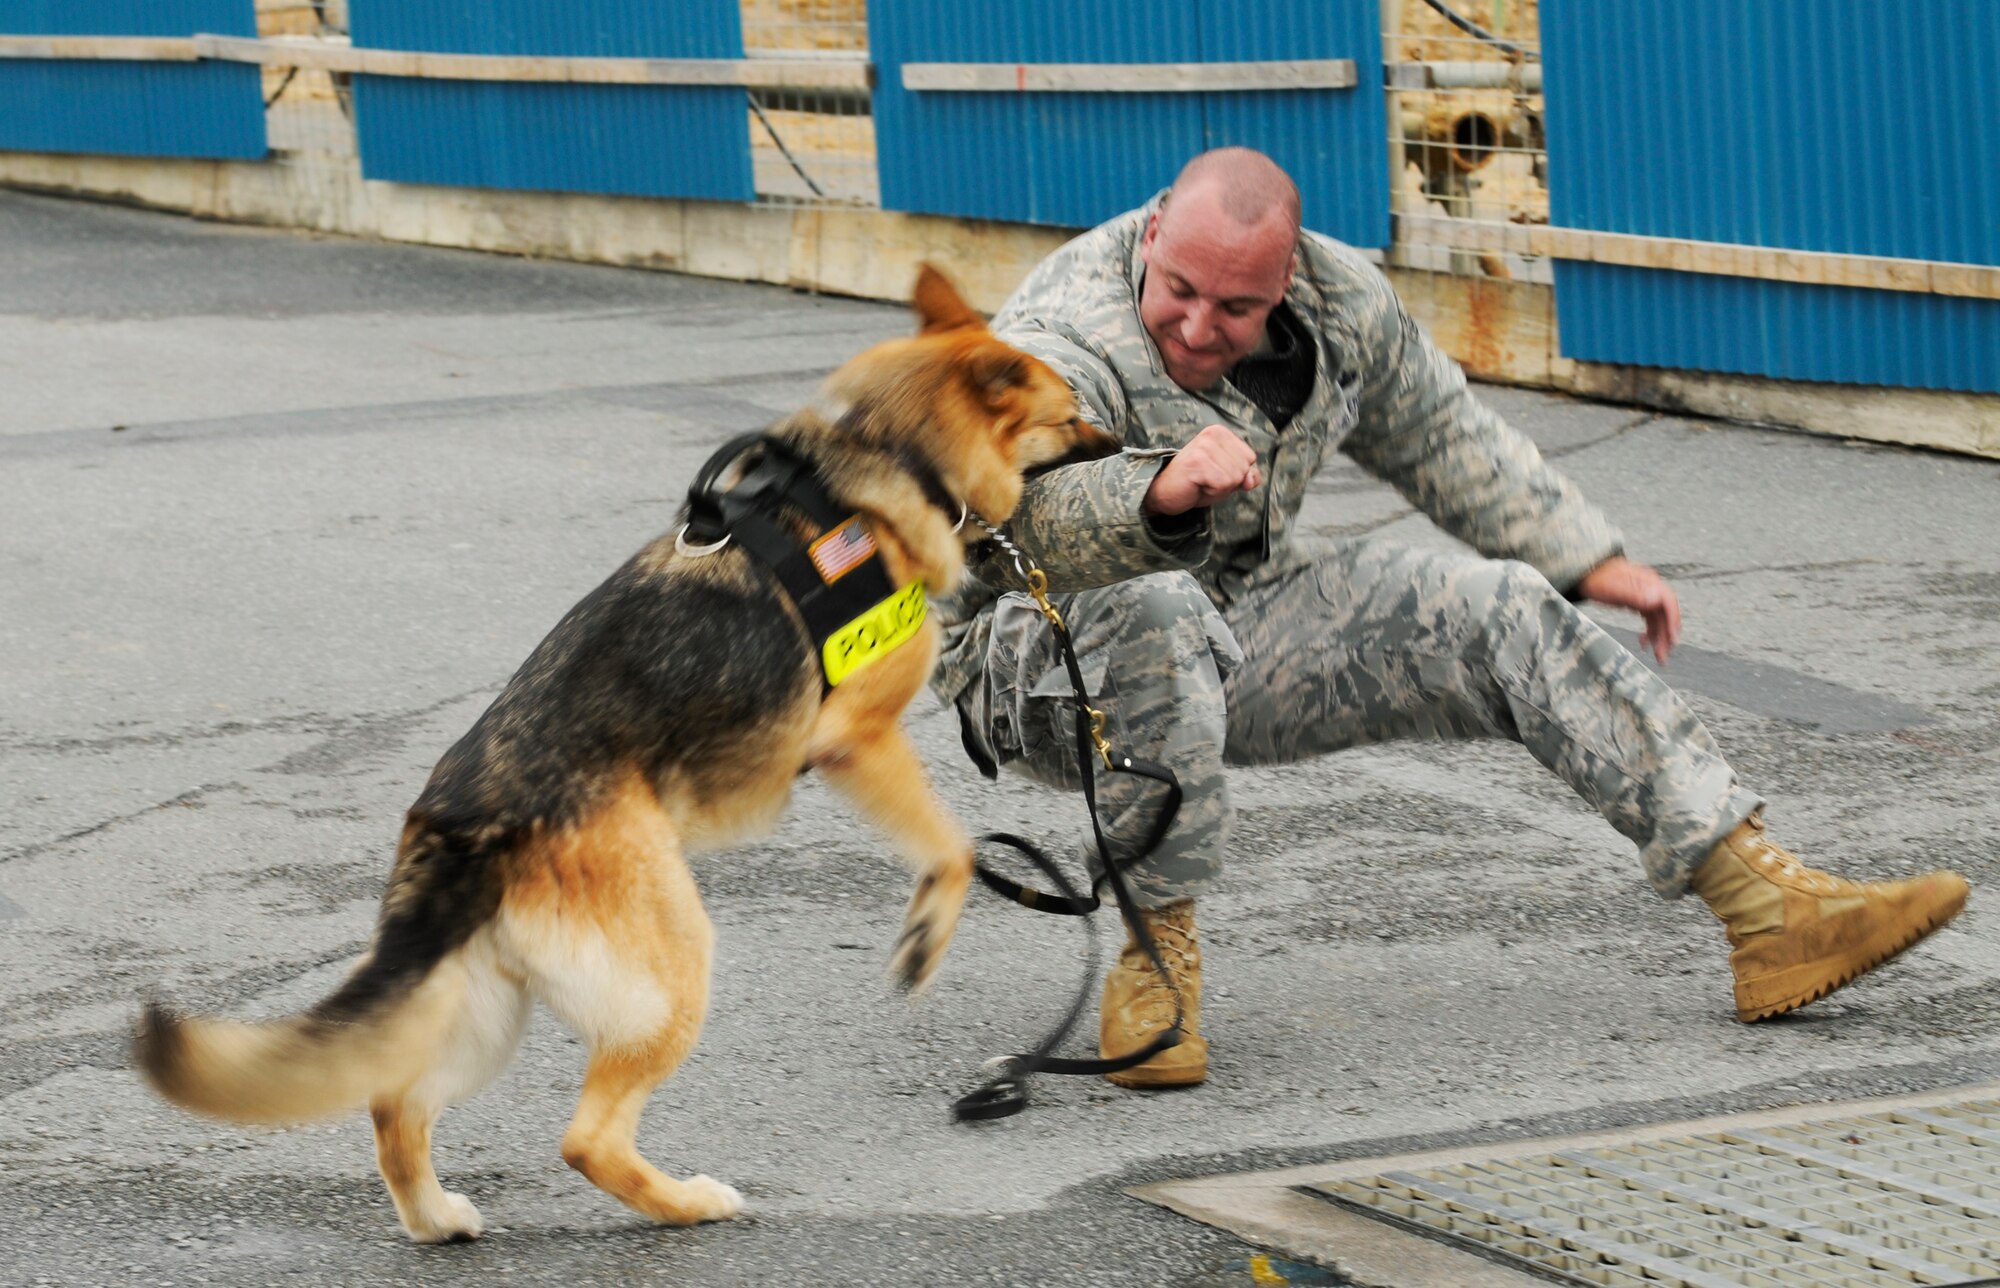 Zena, an 18th Security Forces military working dog, takes the suspected bank robber down during Beverly High 09-2 Local Operational Readiness Exercise May 12. The LORE tests base personnel on their readiness for real world emergency/combat events.  (U.S. Air Force photo/Airman 1st Class Chad Warren)